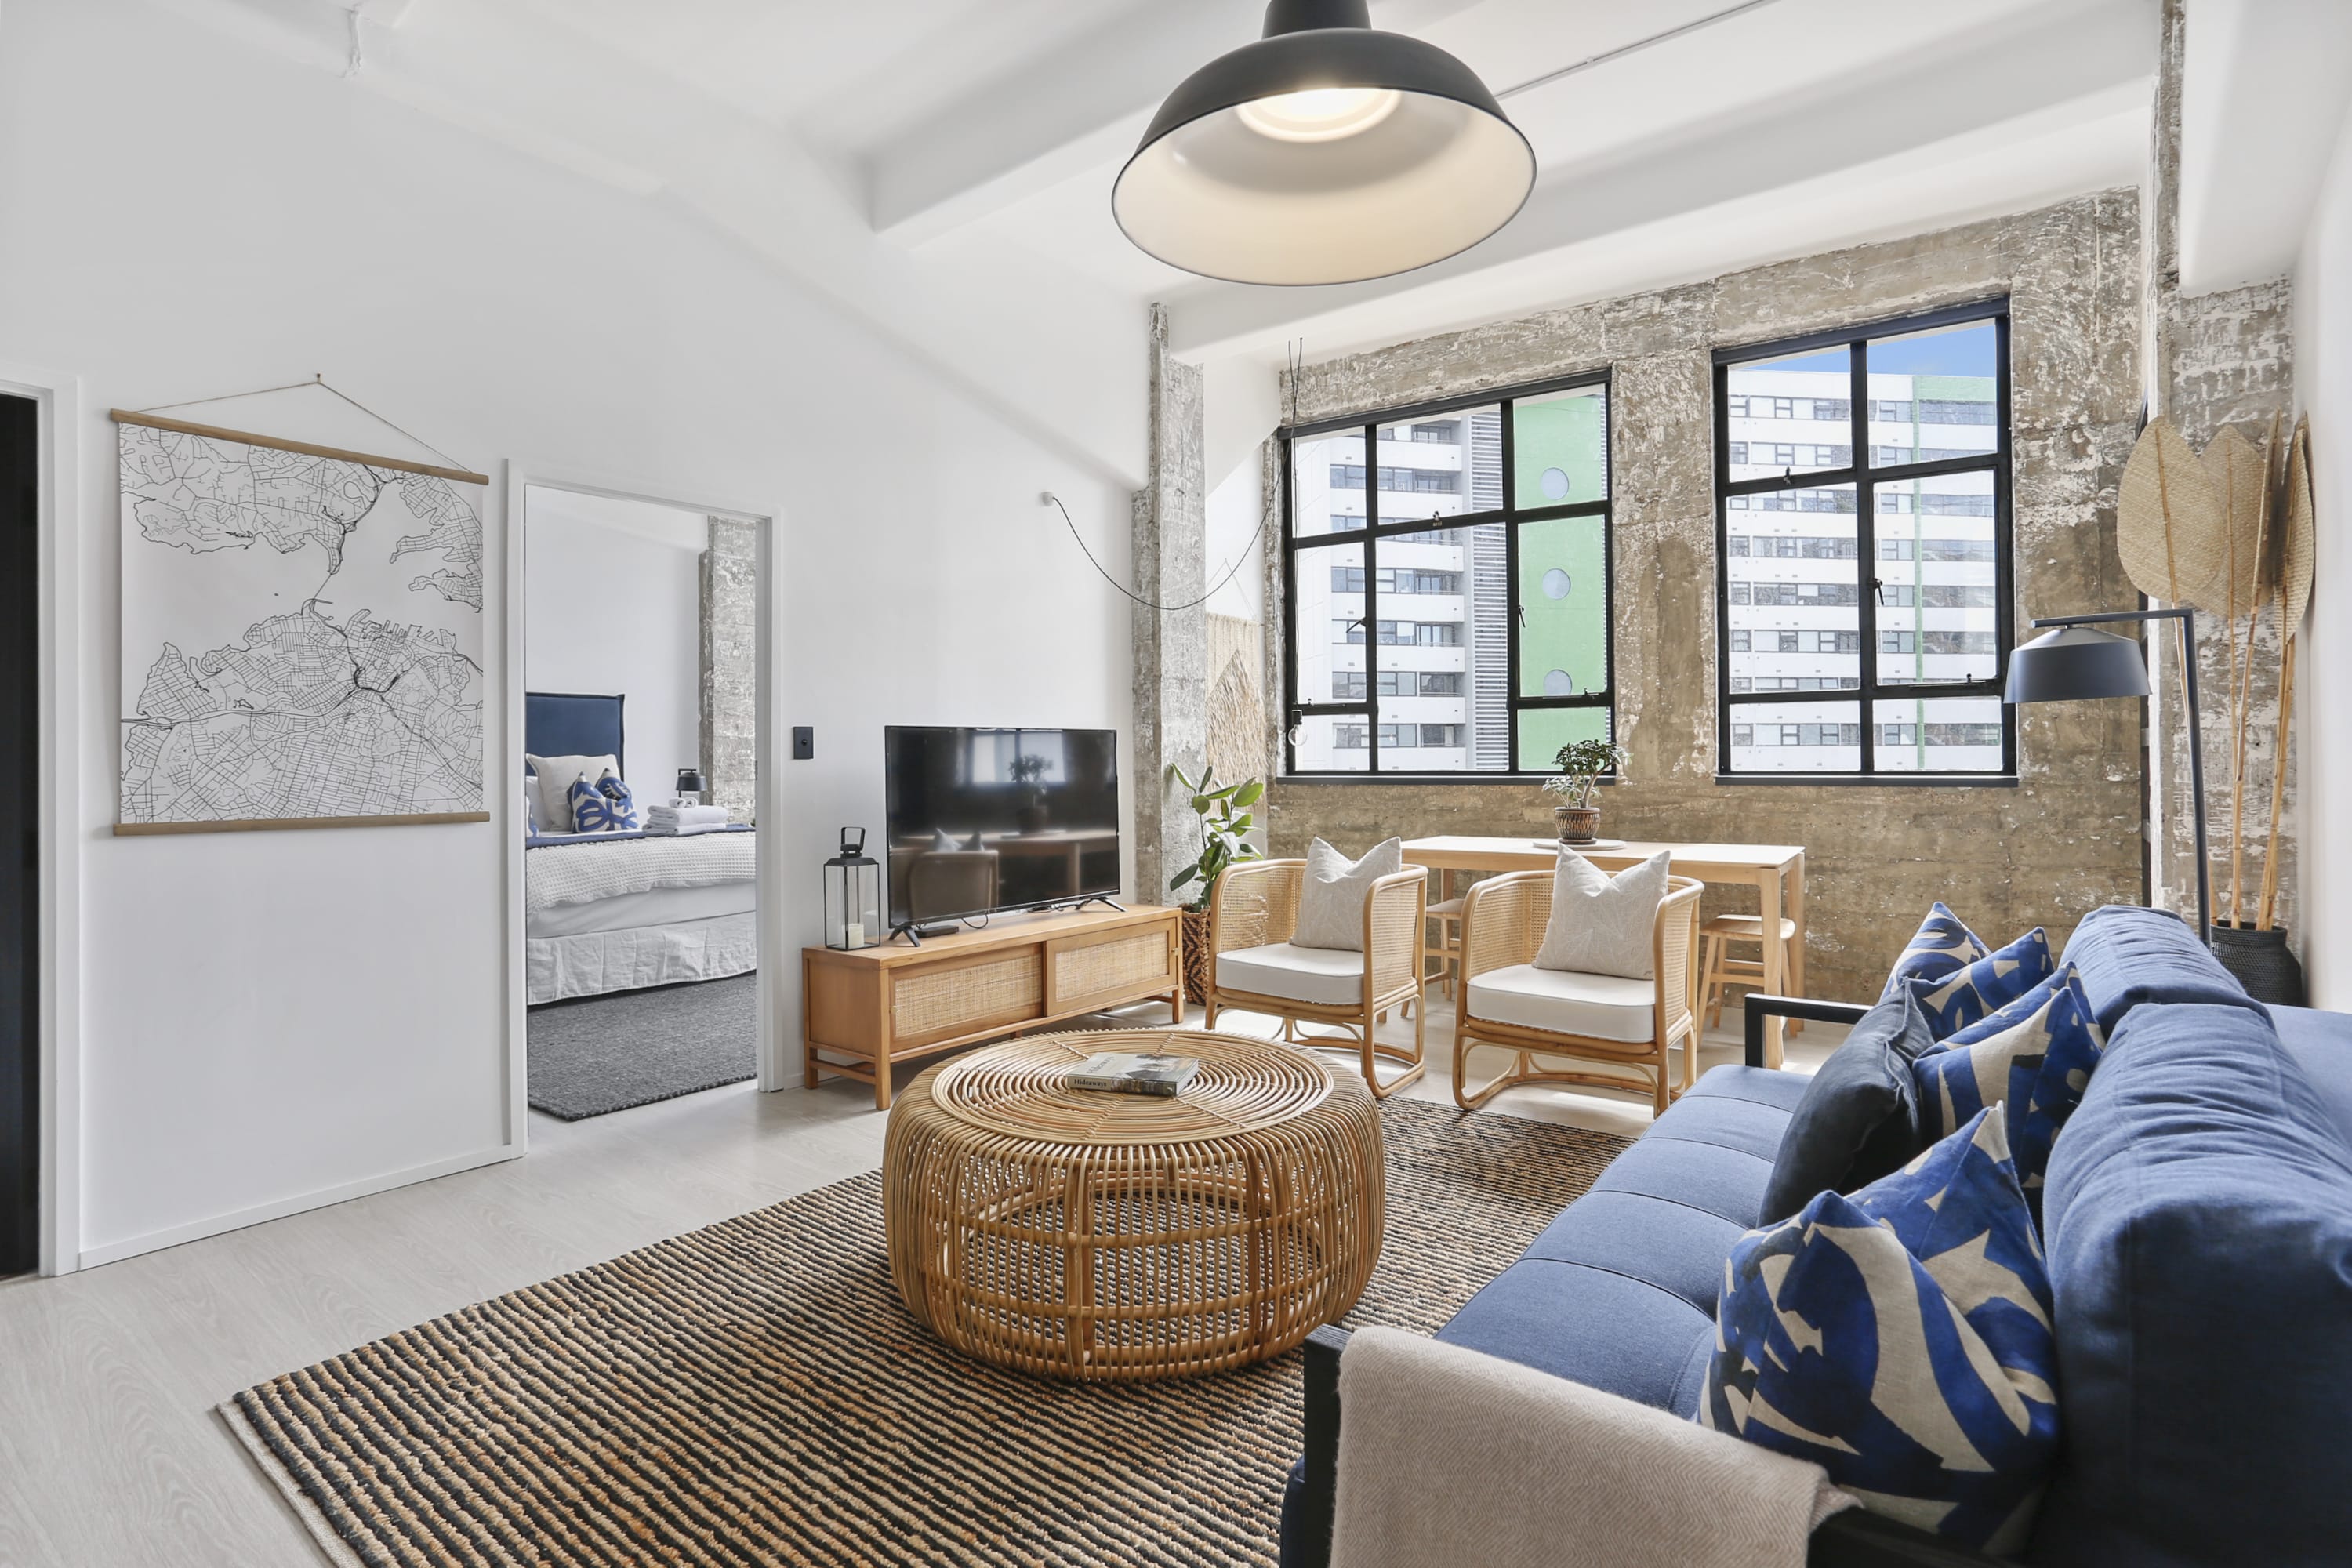 Luxurious Bohemian style apartment in Britomart - Image 2